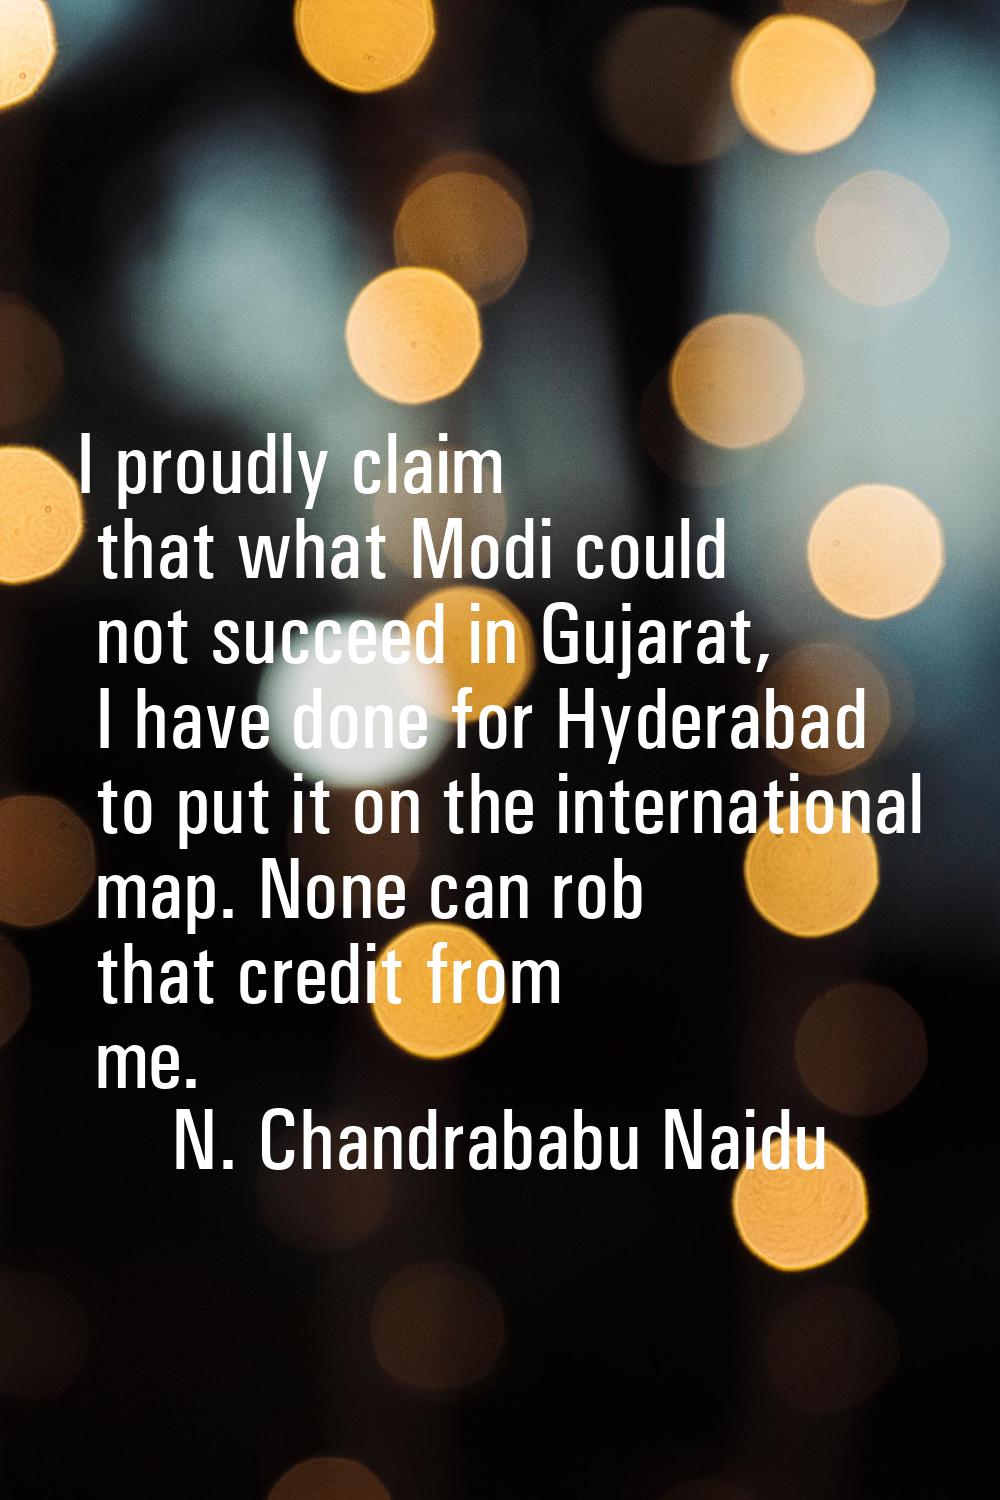 I proudly claim that what Modi could not succeed in Gujarat, I have done for Hyderabad to put it on